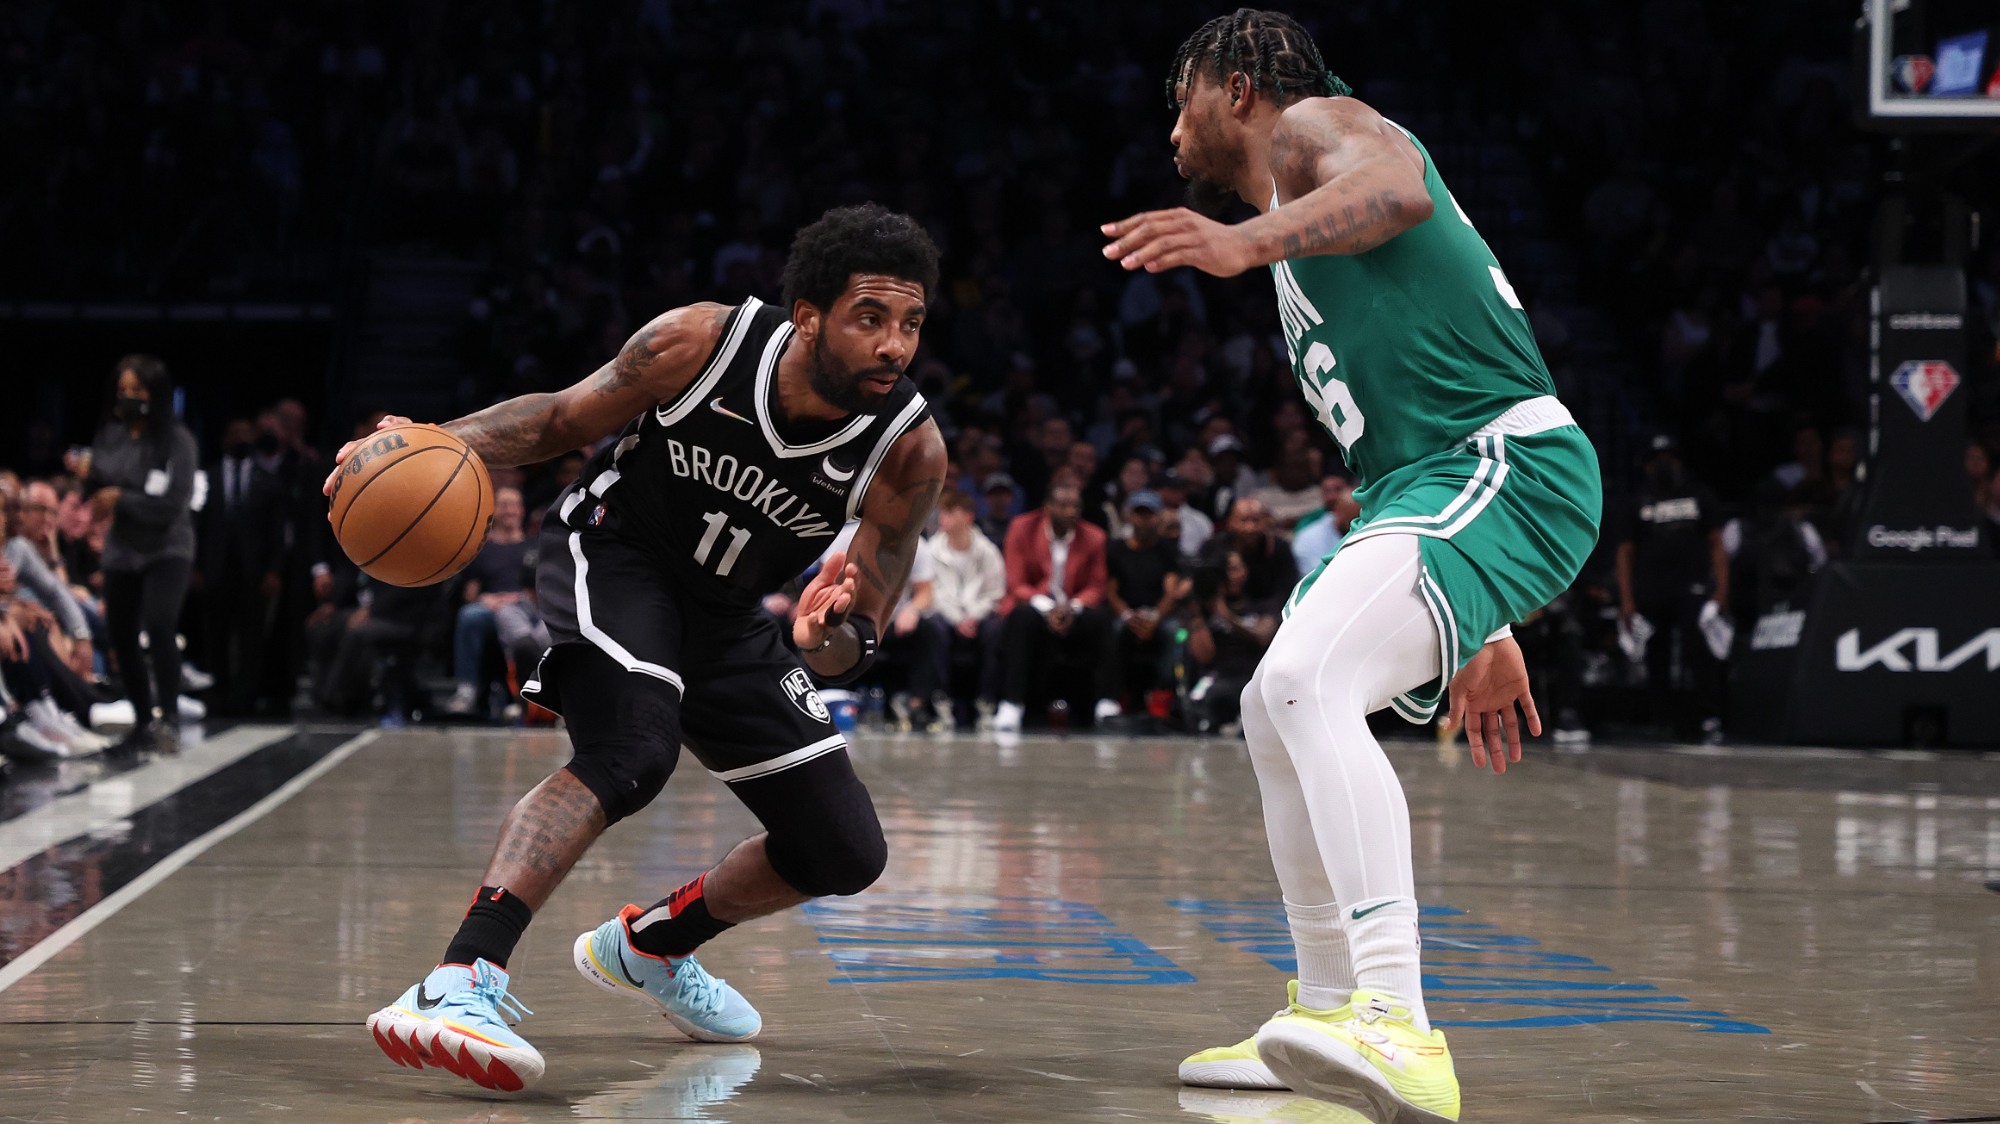 Celtics vs Nets live stream: Game 4 schedule, channels and how to watch NBA playoffs online tonight